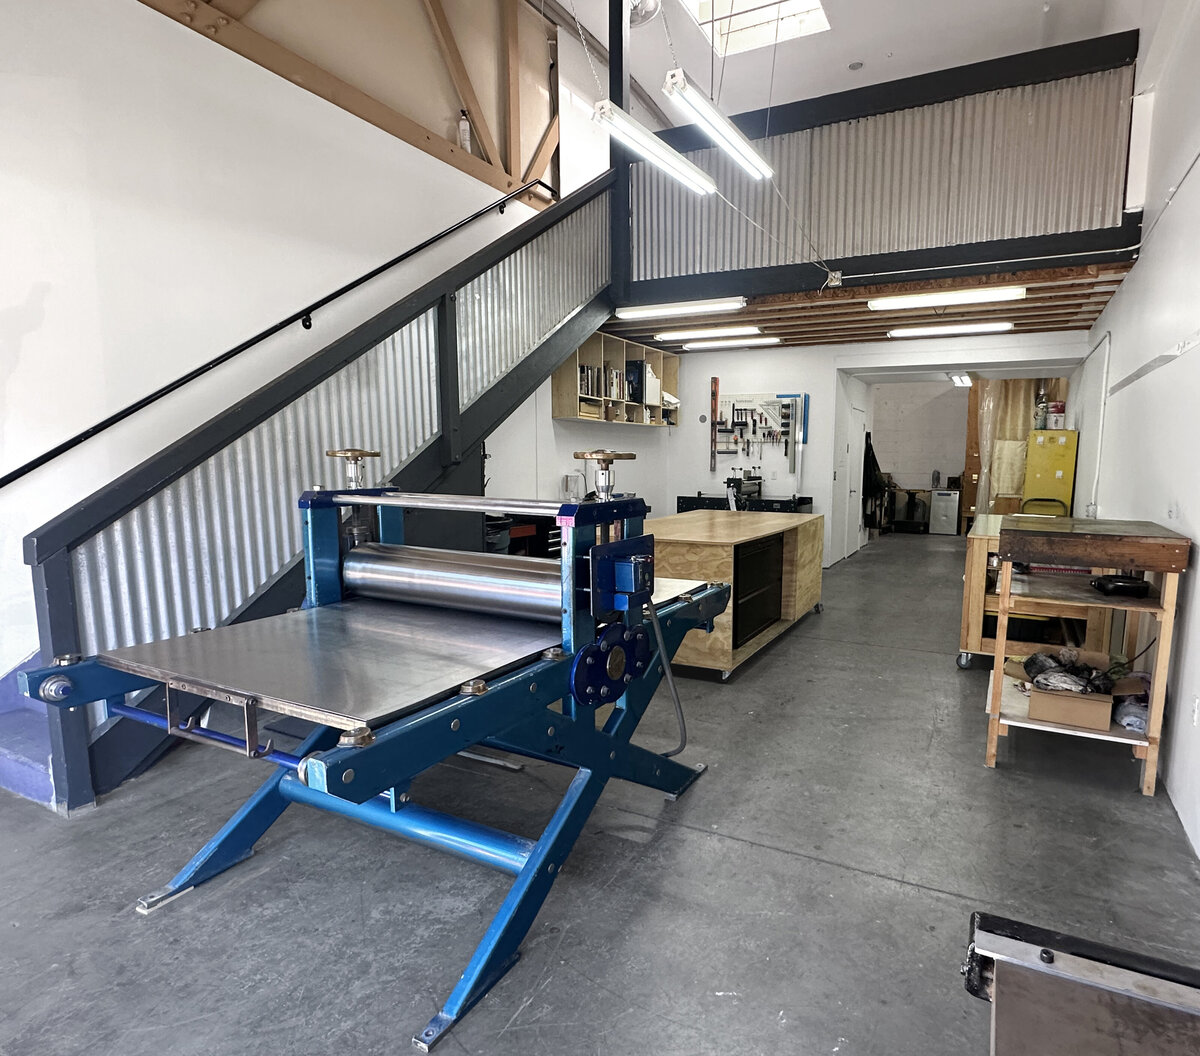 A spacious printmaking studio featuring a large blue press machine, work tables, and an organized tool wall.